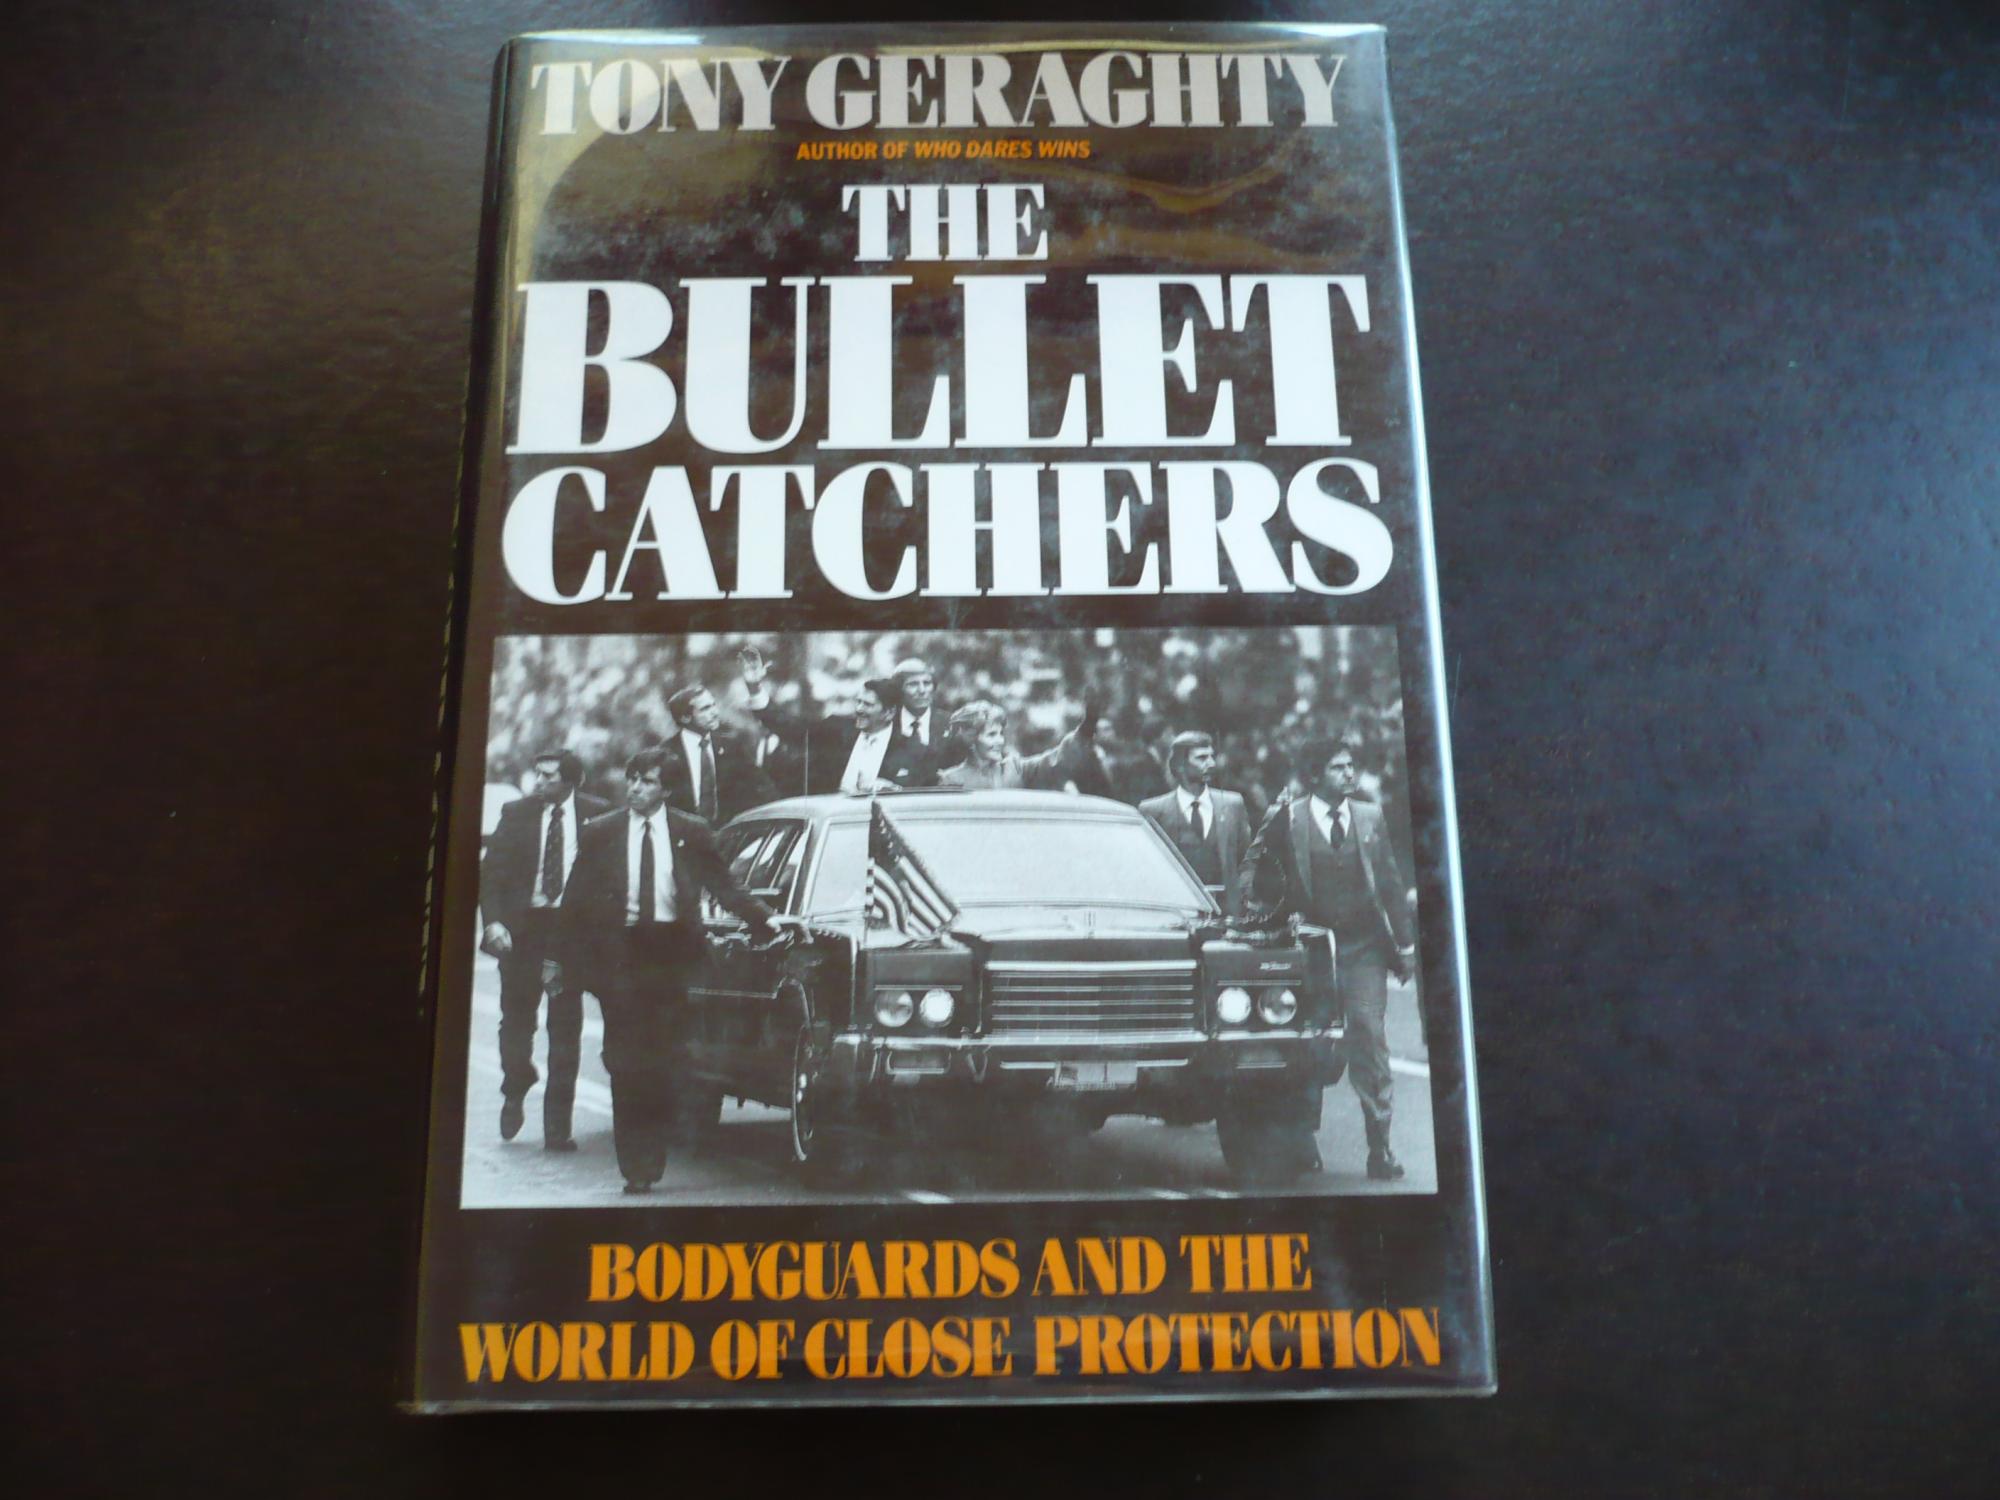 The Bullet Catchers: Bodyguards and the World of Close Protection. - Geraghty, Tony